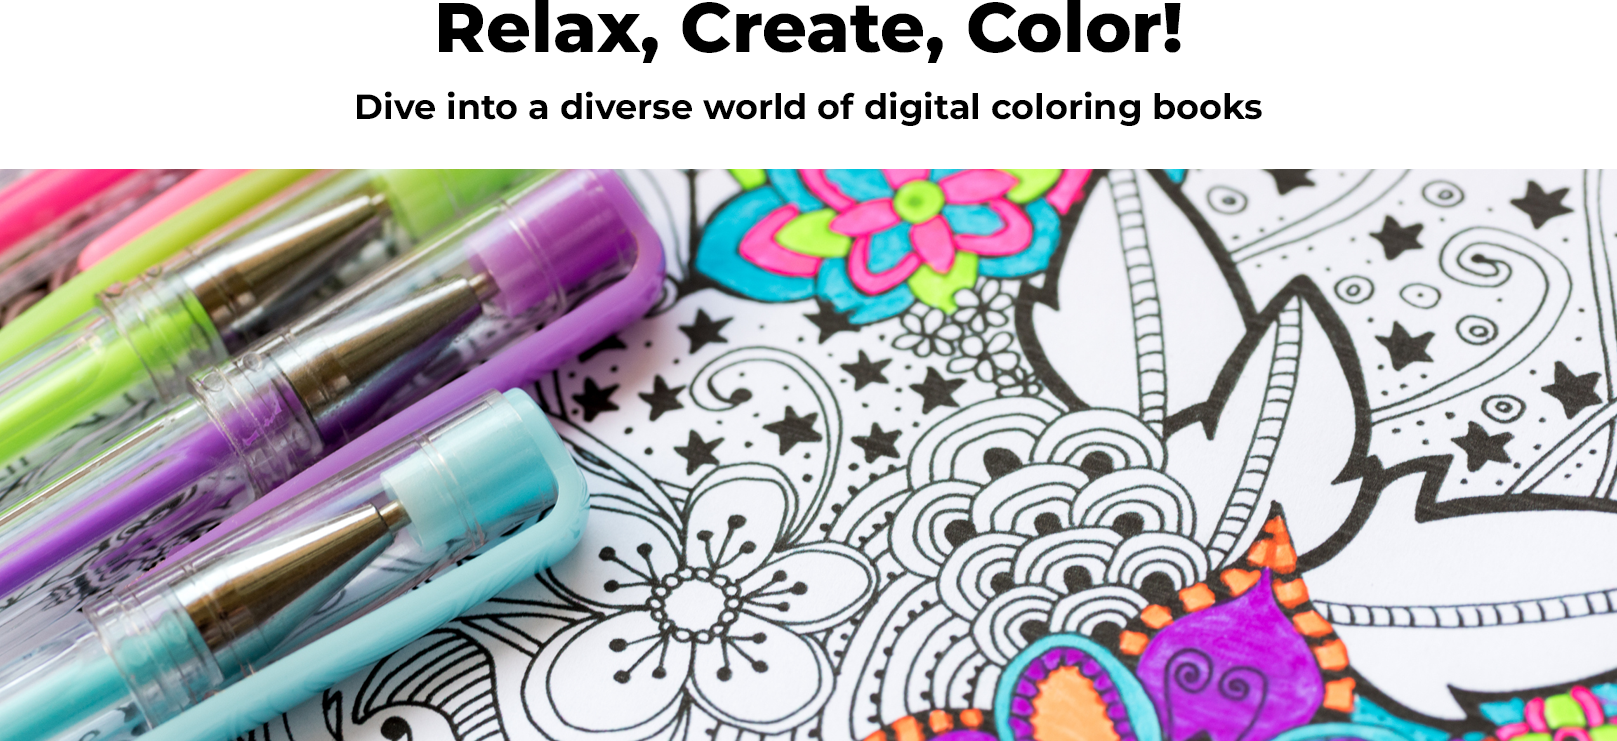 Relax, Create, Color! Dive into diverse world of digital coloring books